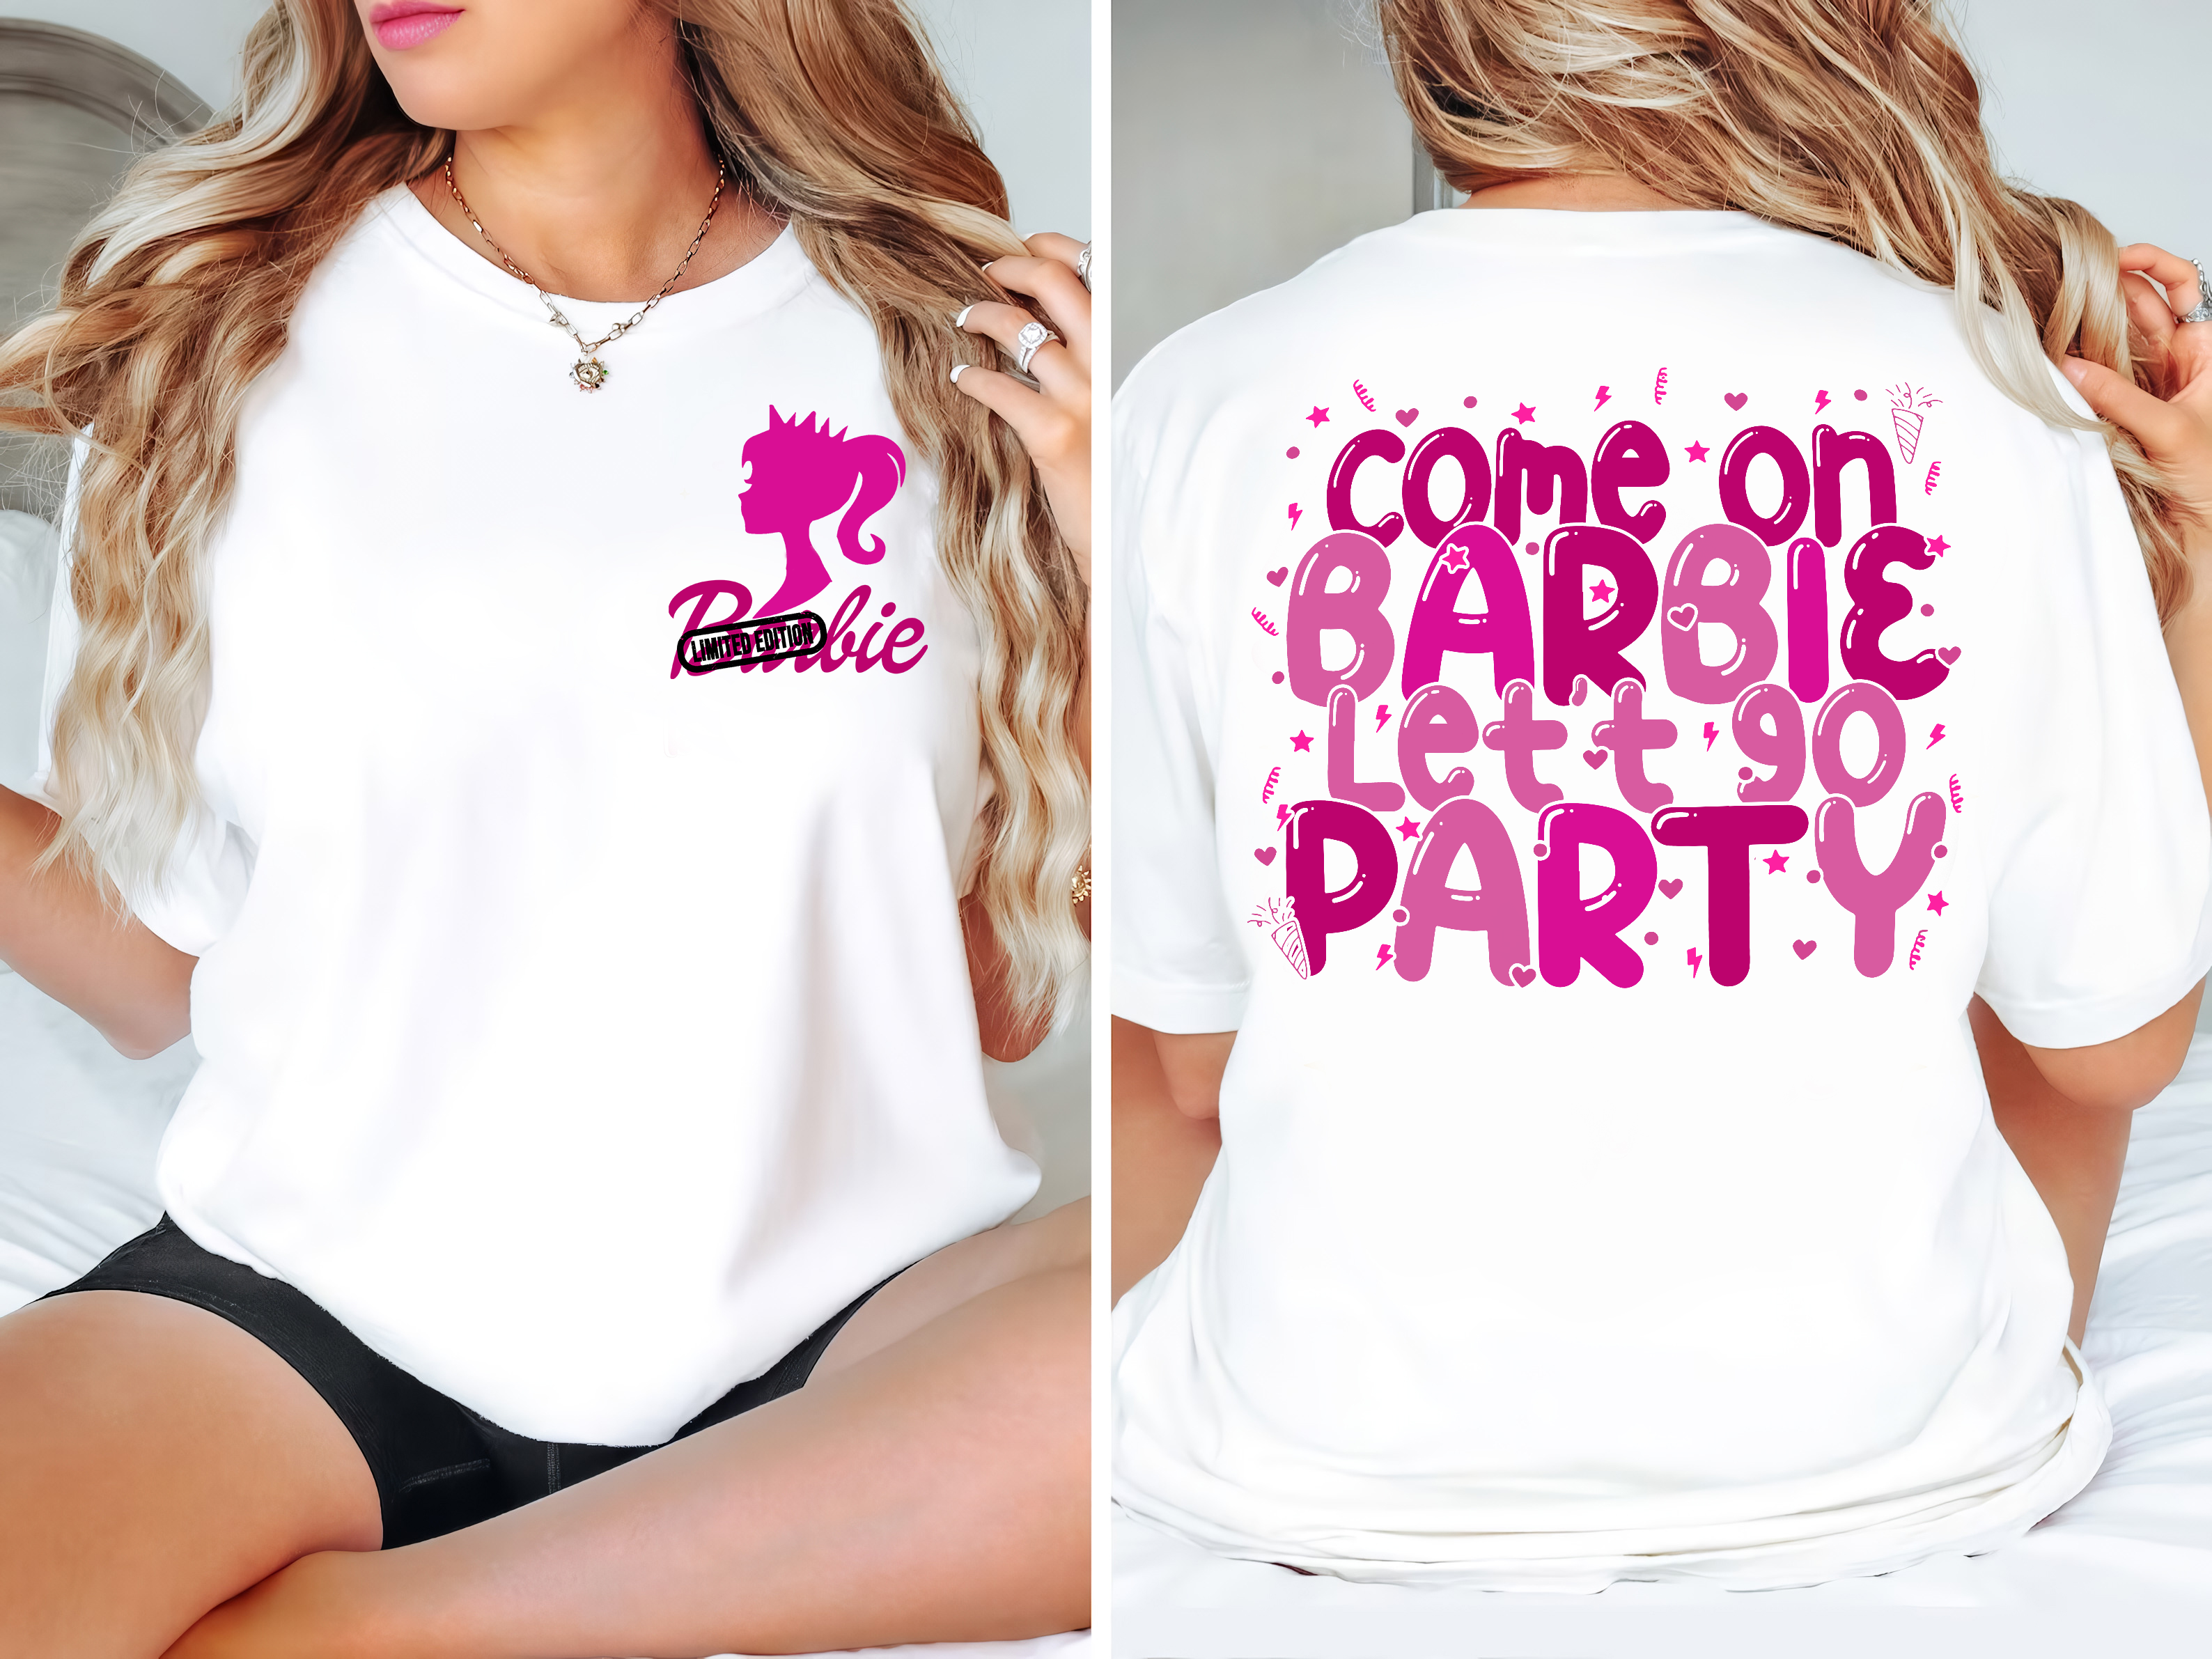 Come On Barbie Let’s Go Party (2side) T-Shirt, Pink Barbie (2 Side) T-Shirt, Doll Baby Girl T-Shirt